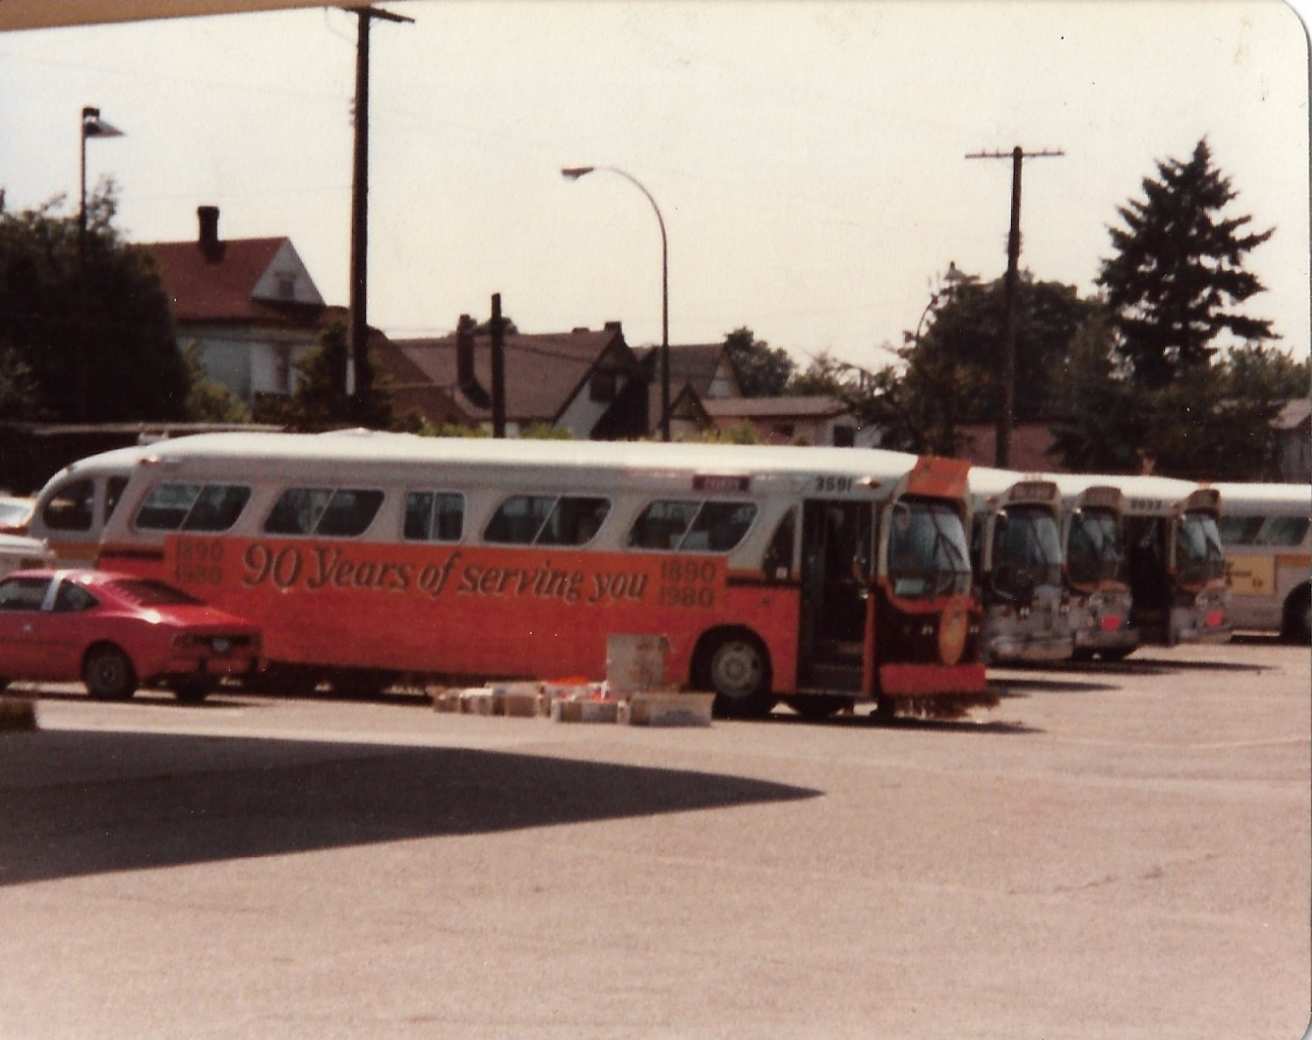 A group of buses parked in a parking lot

Description automatically generated with medium confidence